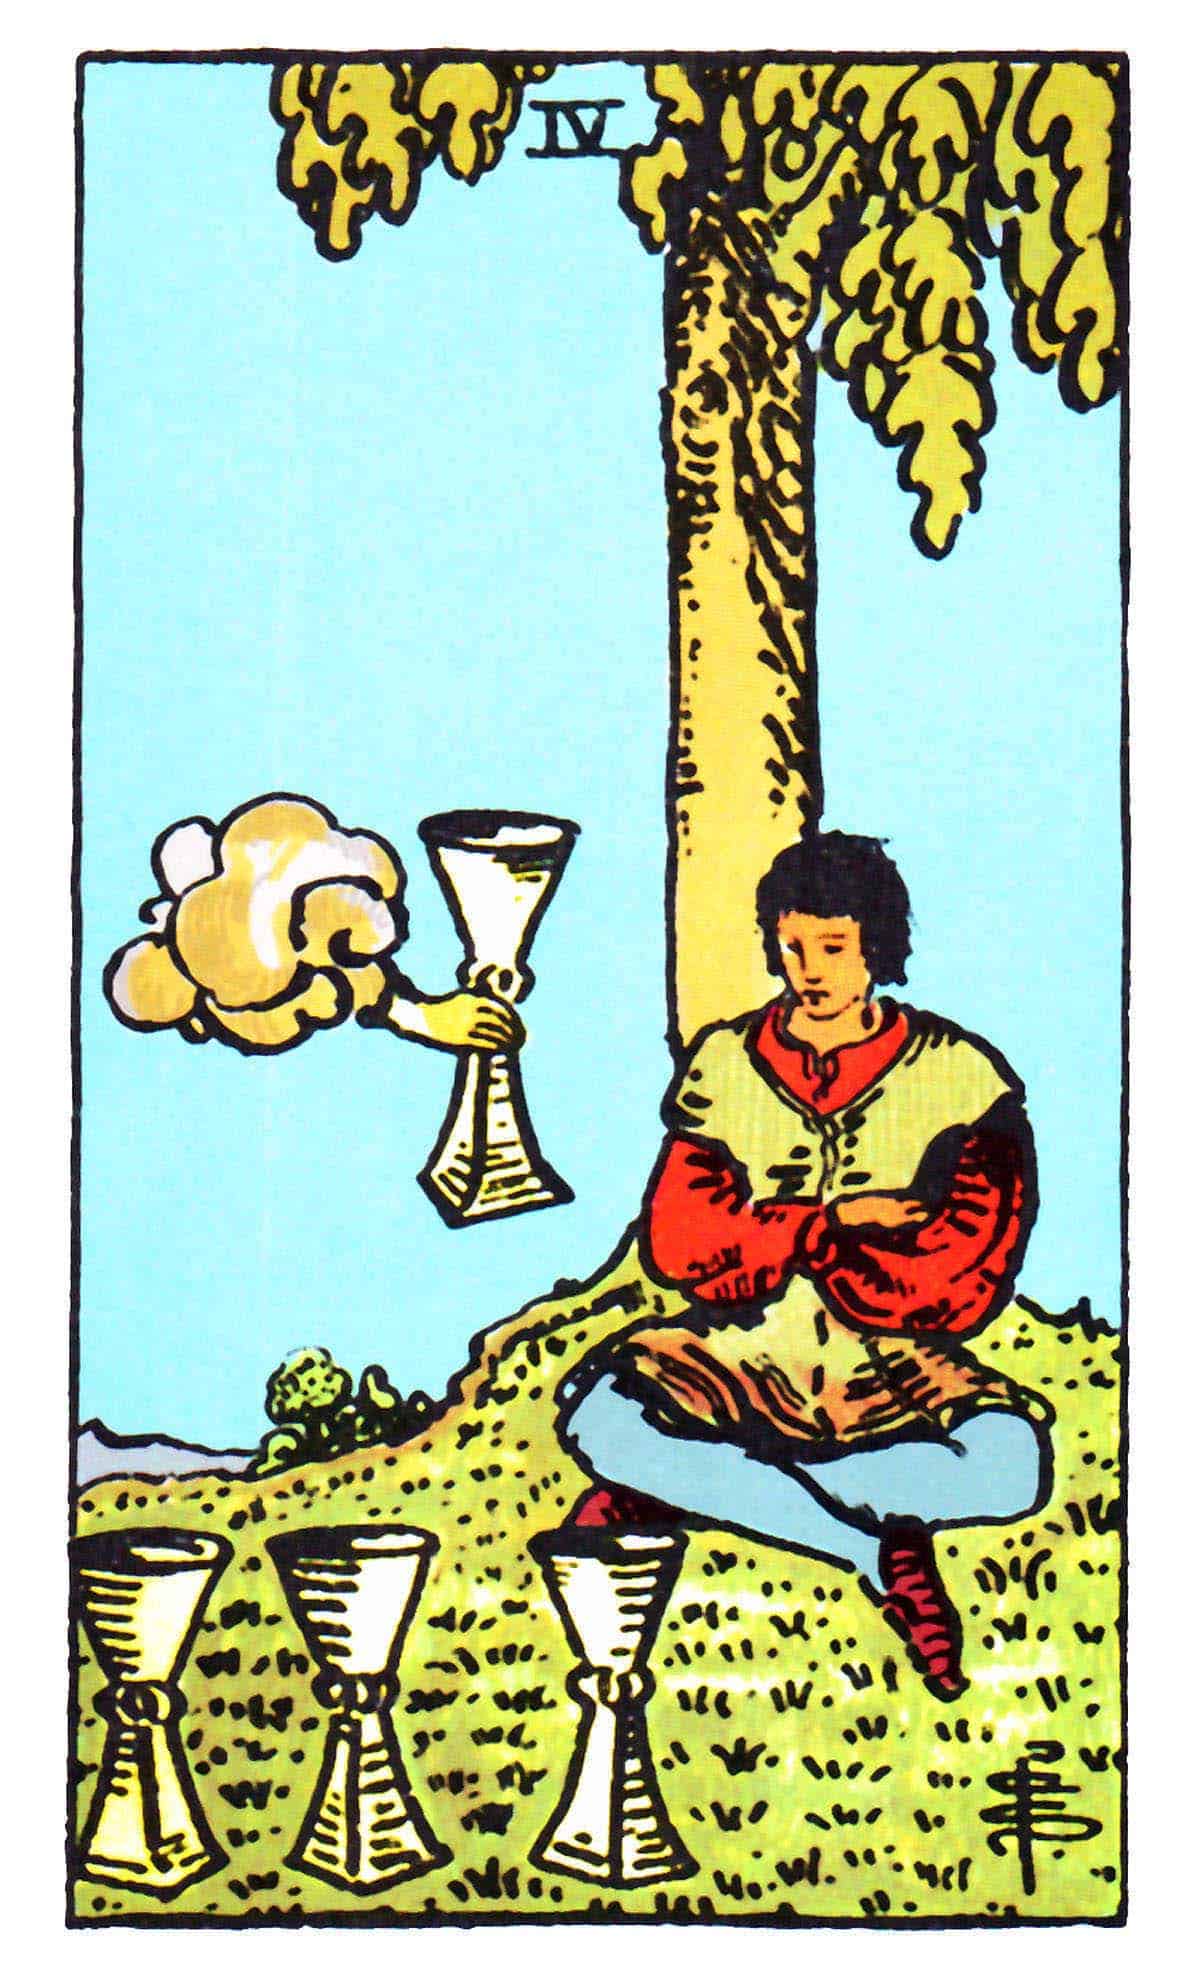 9 of cups tarot guide